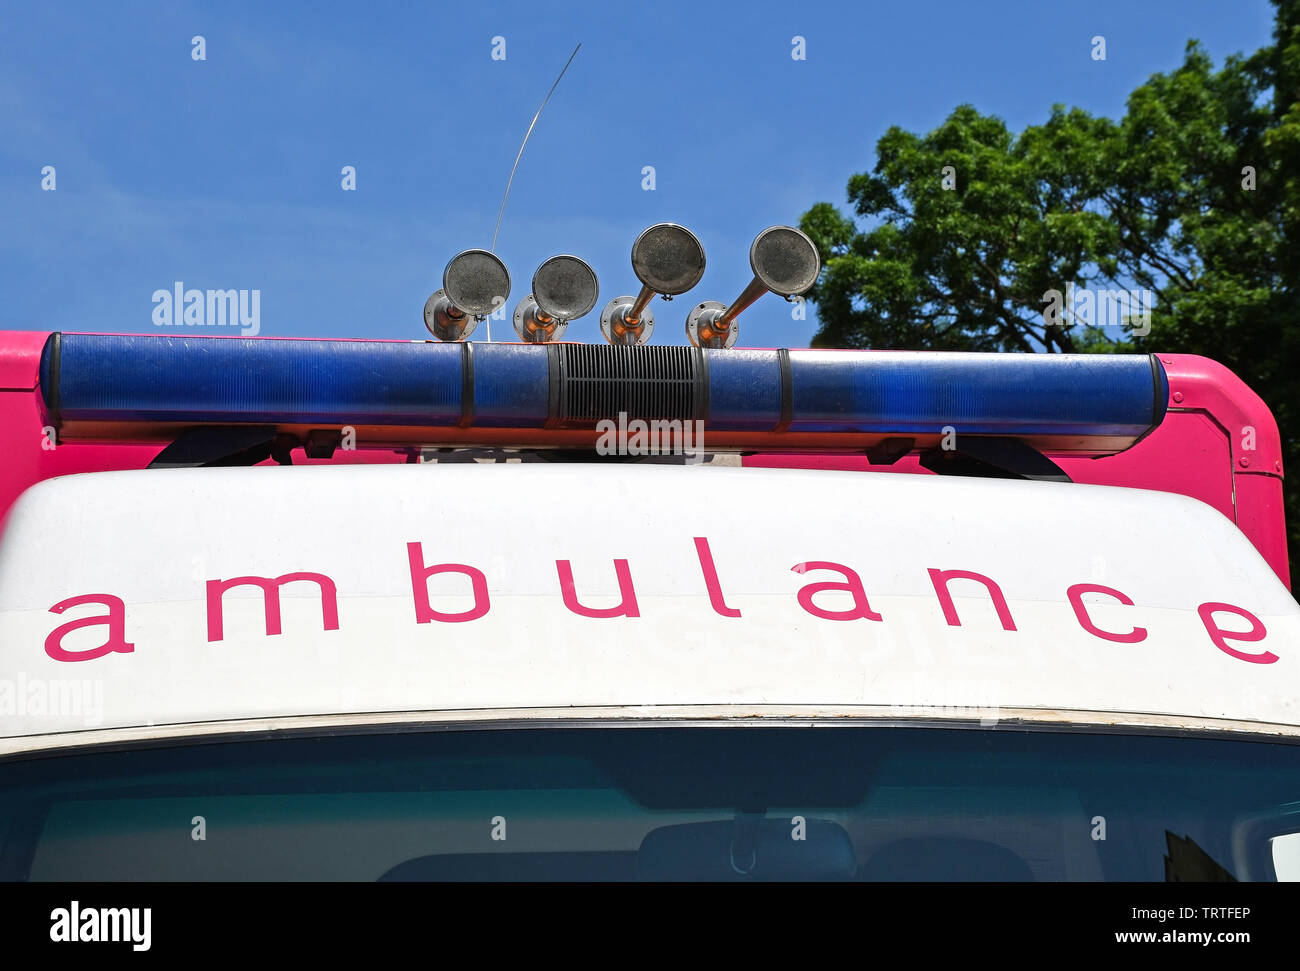 Sirens and light of the ambulance Stock Photo